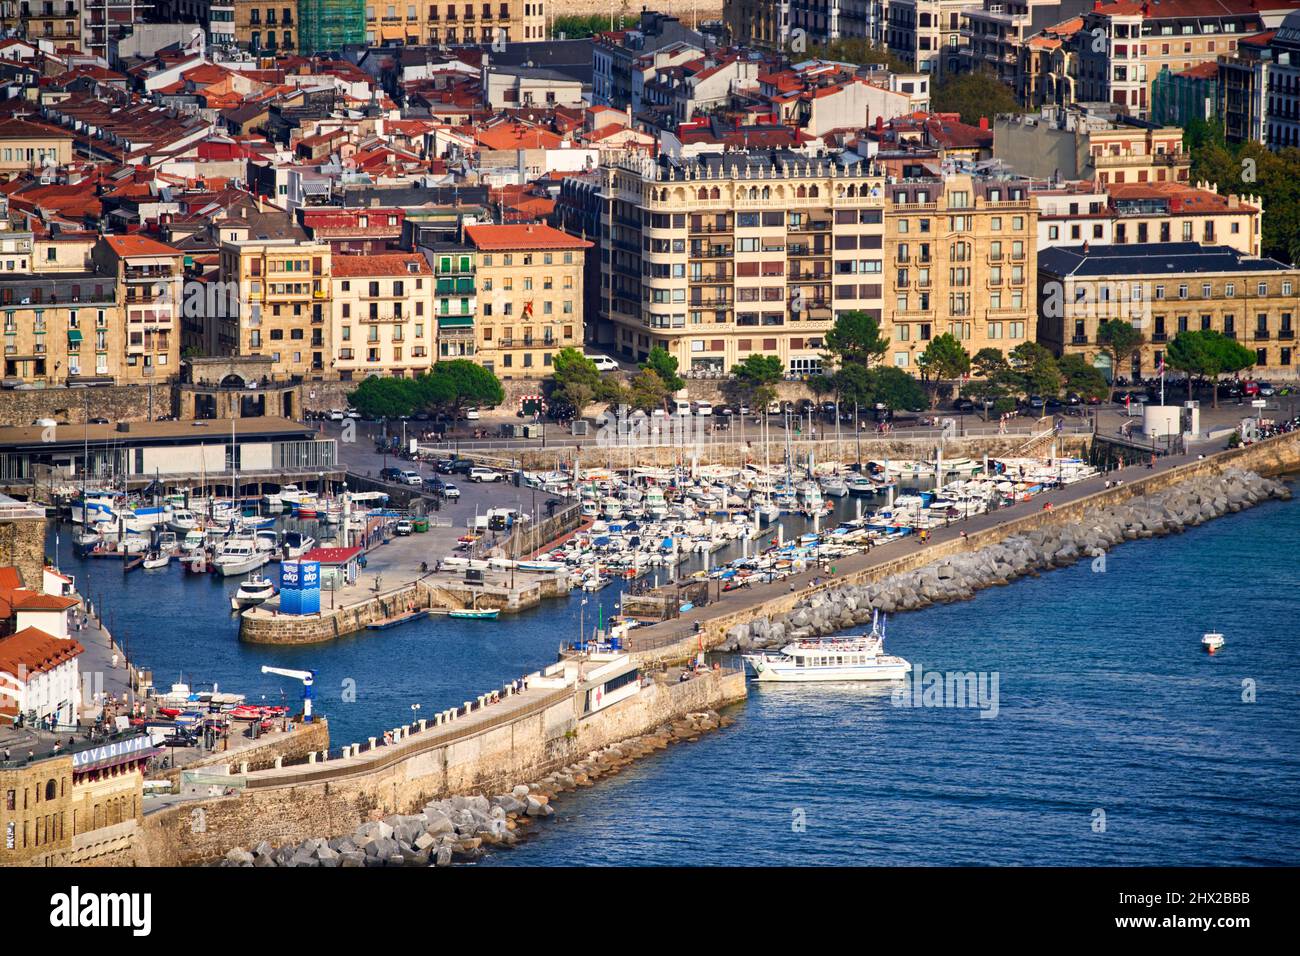 Tourist boat entering the Port, Behind the Old Town, Donostia, San Sebastian, cosmopolitan city of 187,000 inhabitants, noted for its gastronomy, Stock Photo